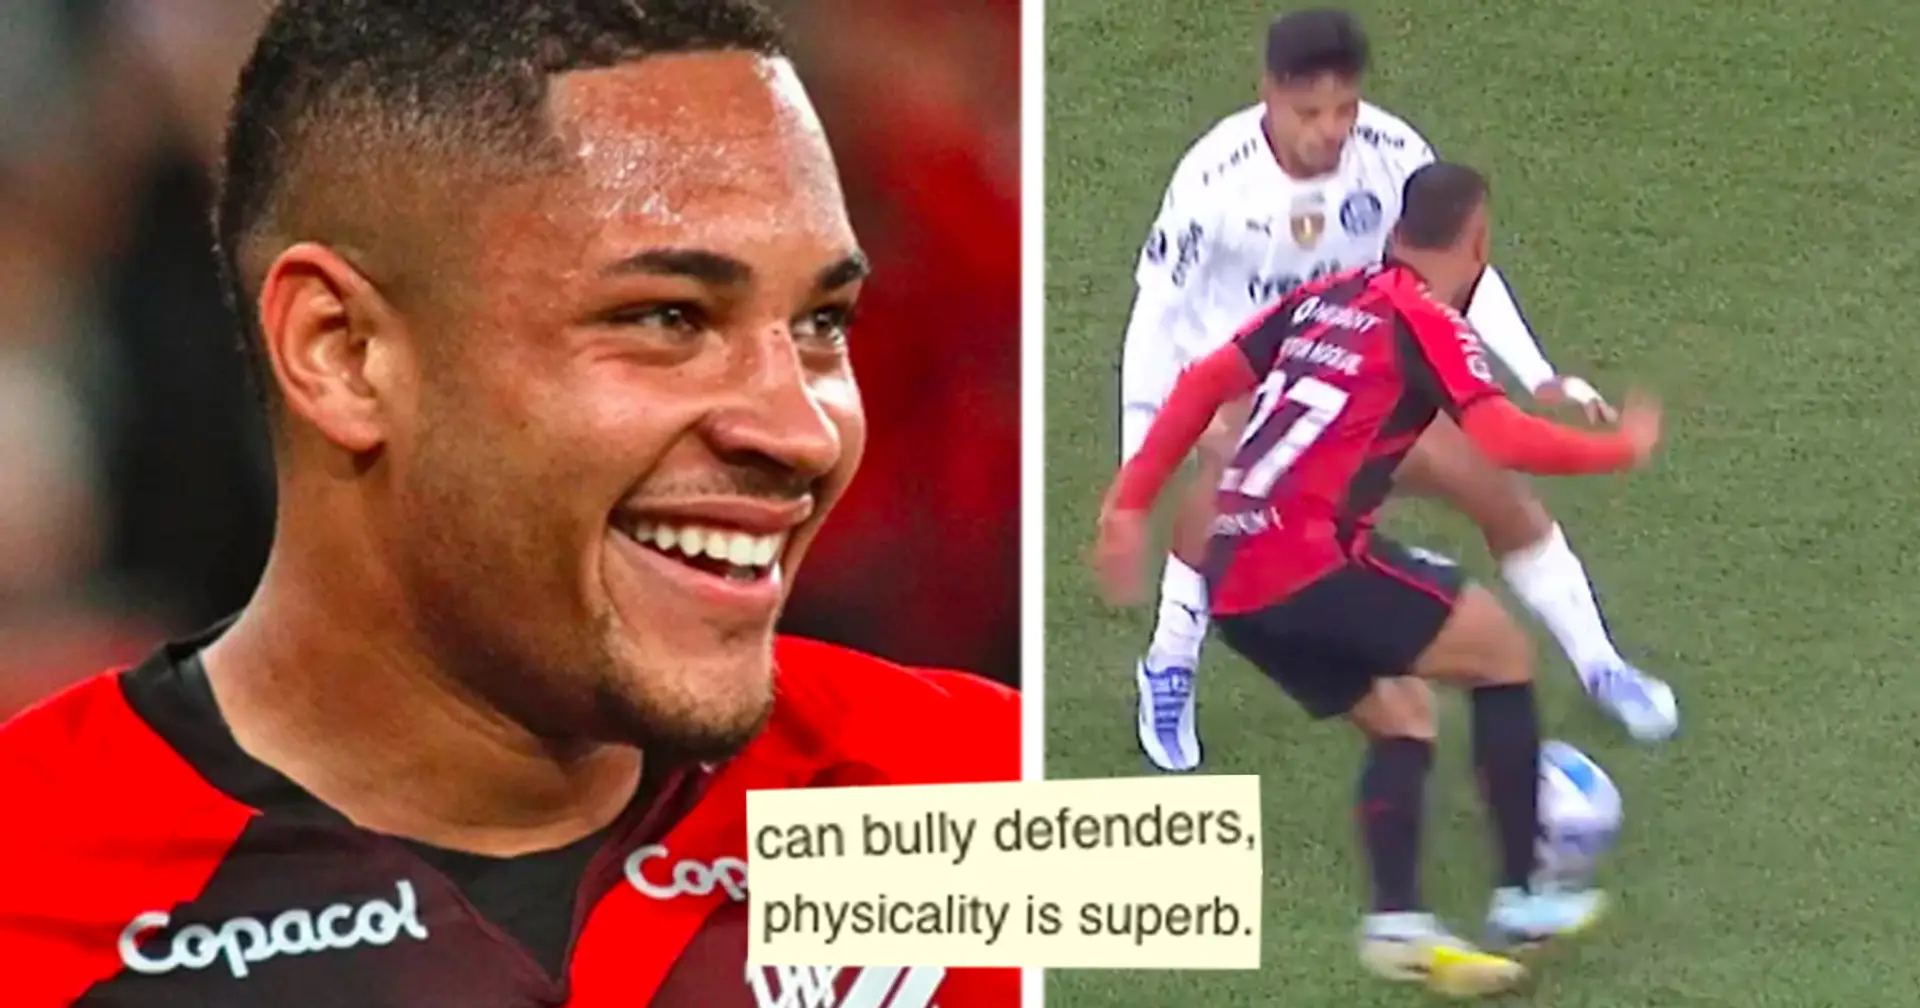 Athletico Paranaense fan names 2 strengths and one weakness of Vitor Roque